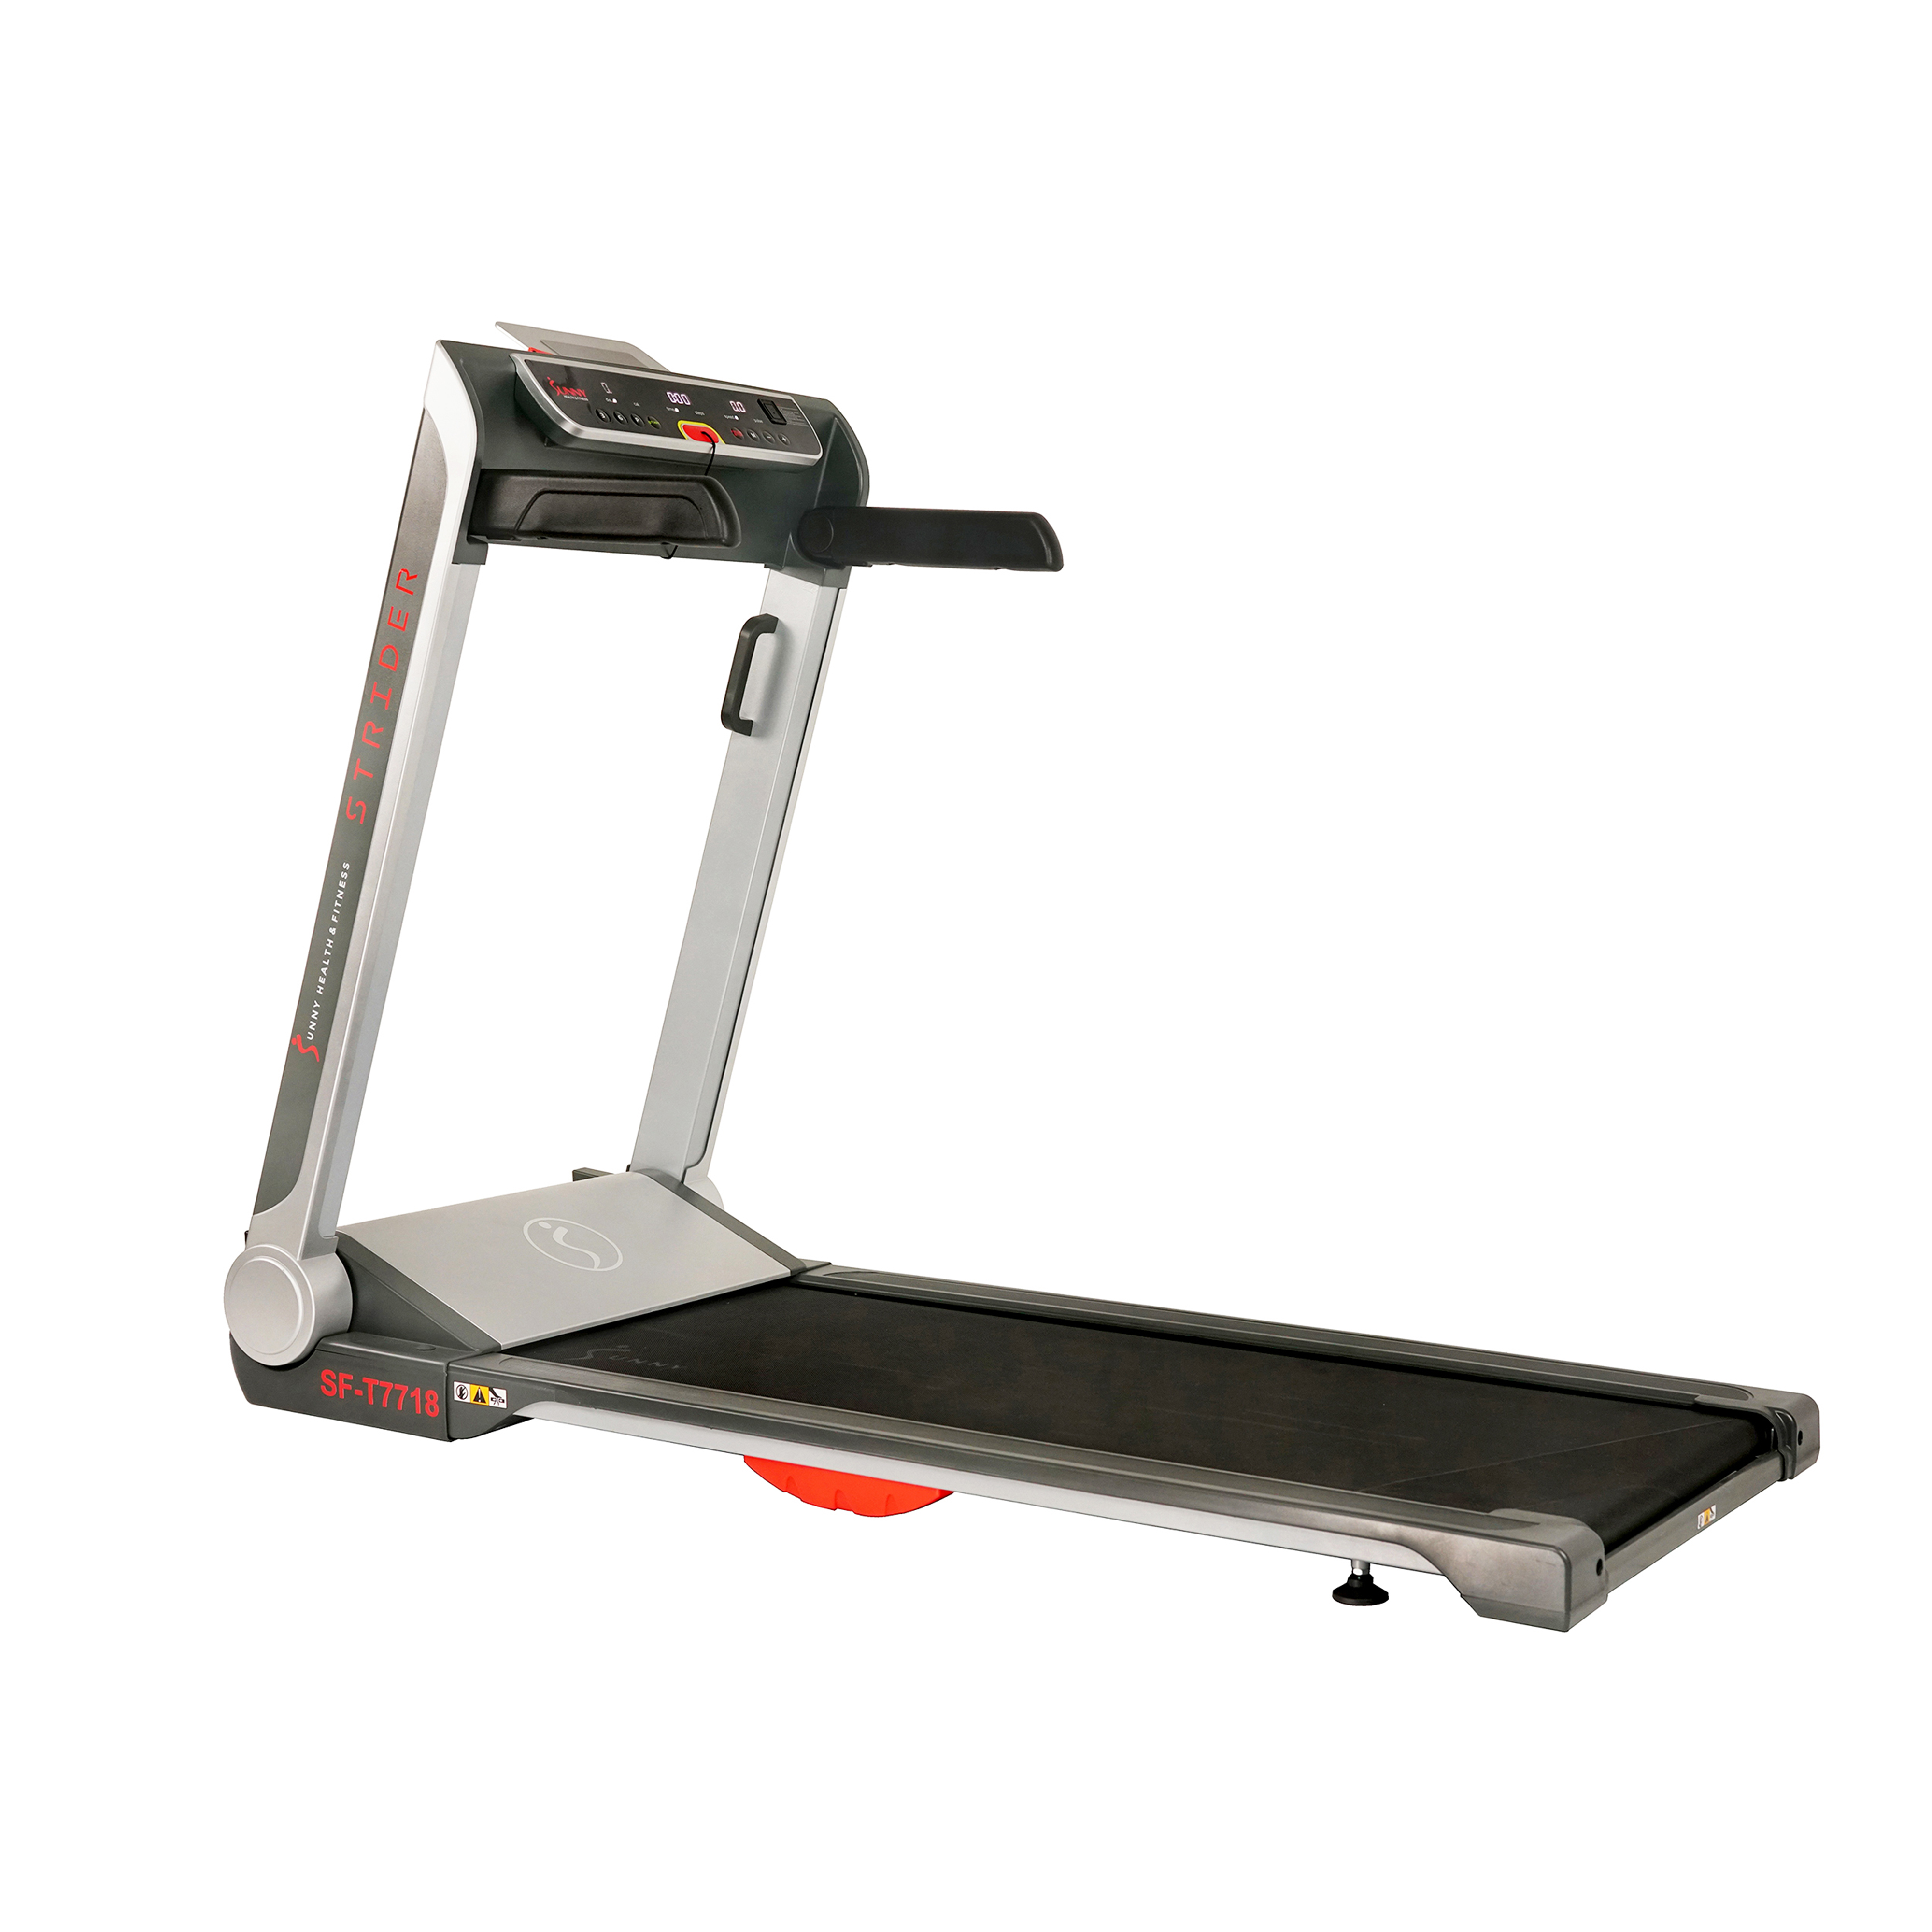 Sunny Health & Fitness Motorized Folding Running Treadmill, 20" Wide Belt, Flat Folding & Low Profile for Portability with Speakers for USB and AUX Audio Connection - Strider, SF-T7718 - image 3 of 9